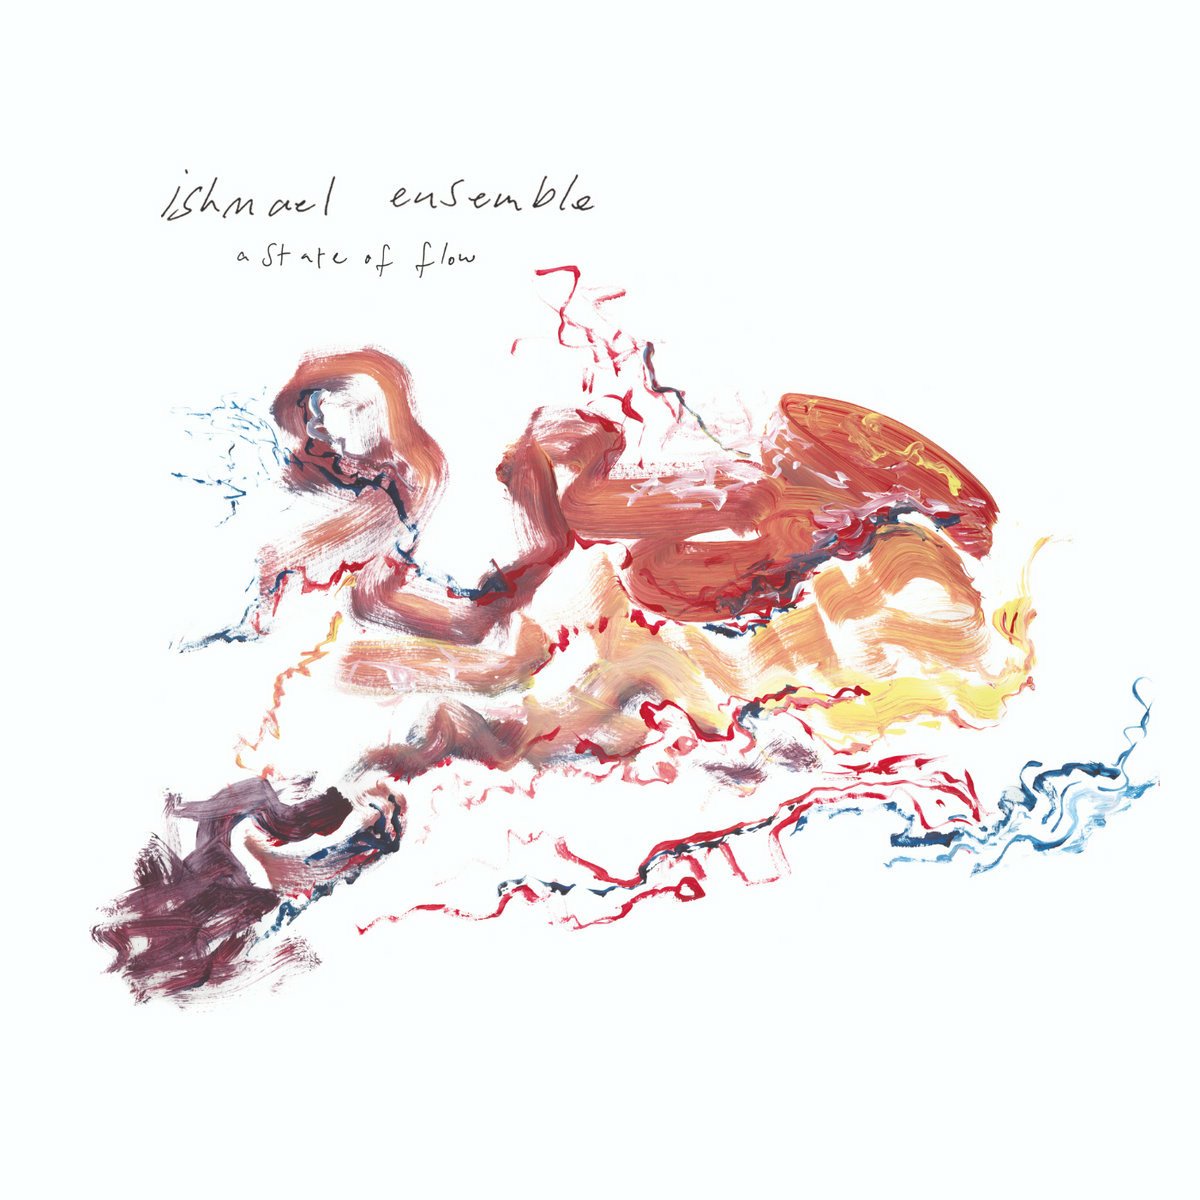 CD Shop - ISHMAEL ENSEMBLE A STATE OF FLOW